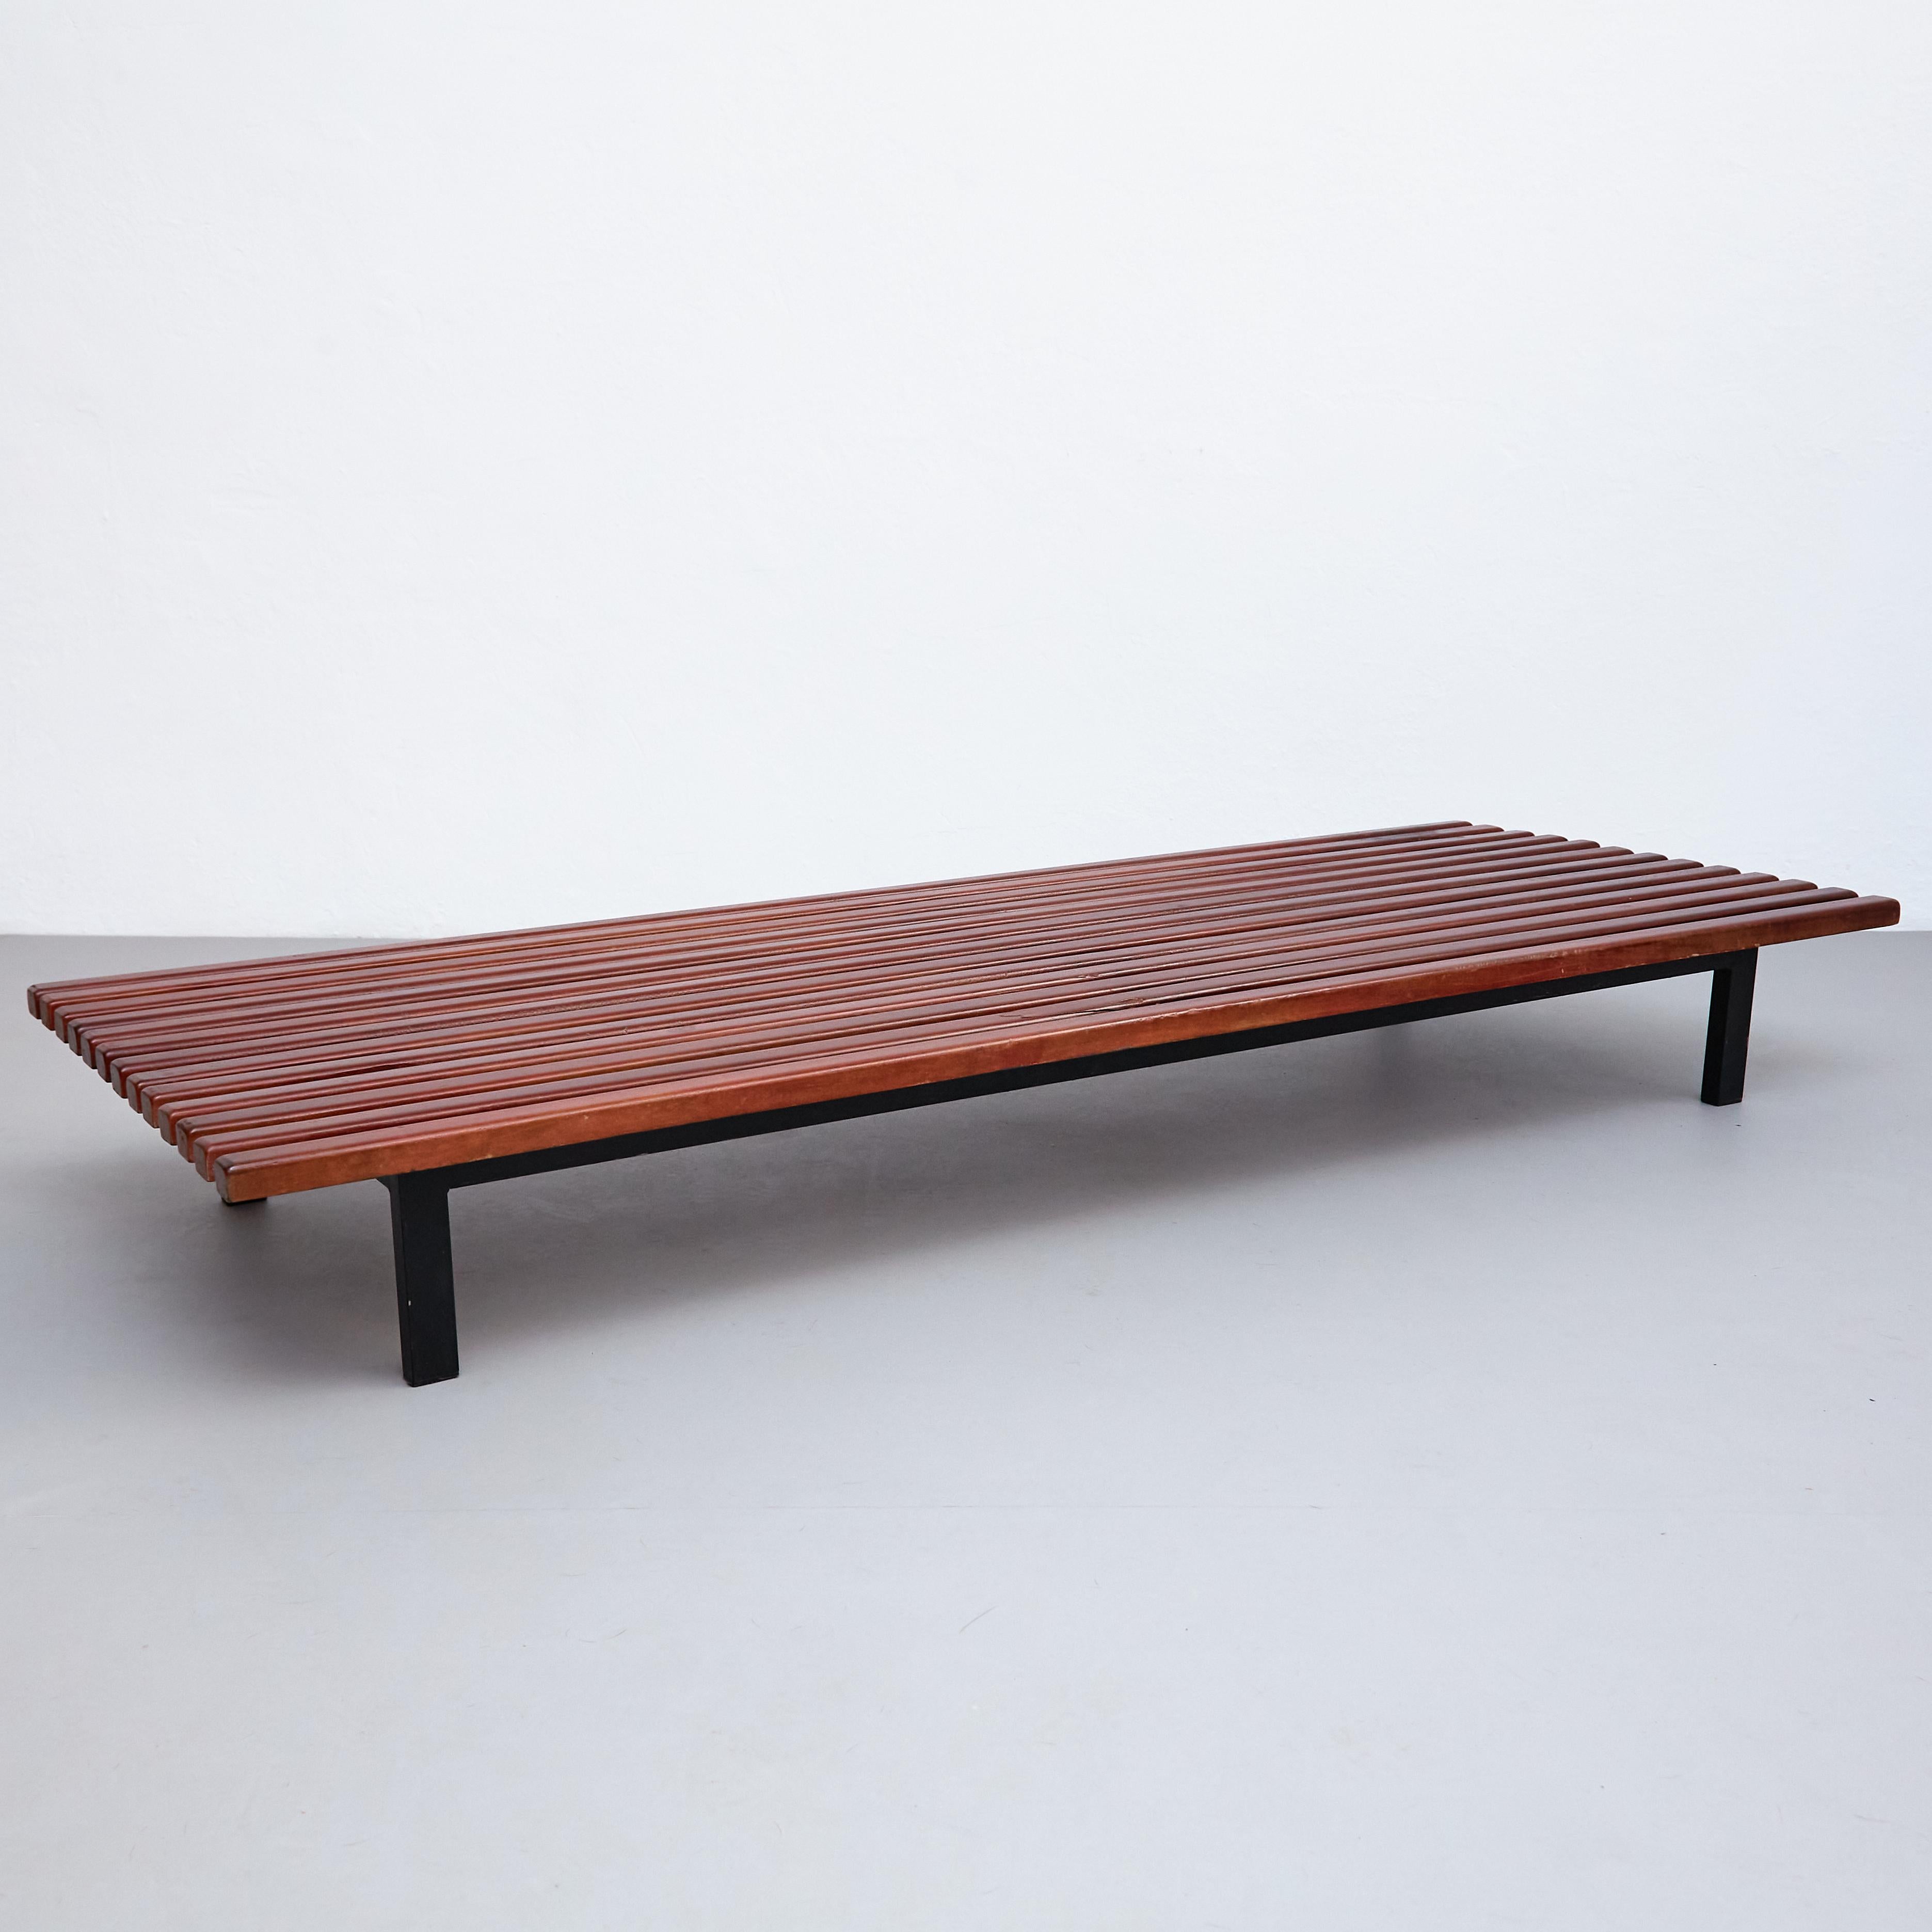 French Charlotte Perriand Mid-Century Modern Wood Metal Cansado Bench, circa 1950 For Sale